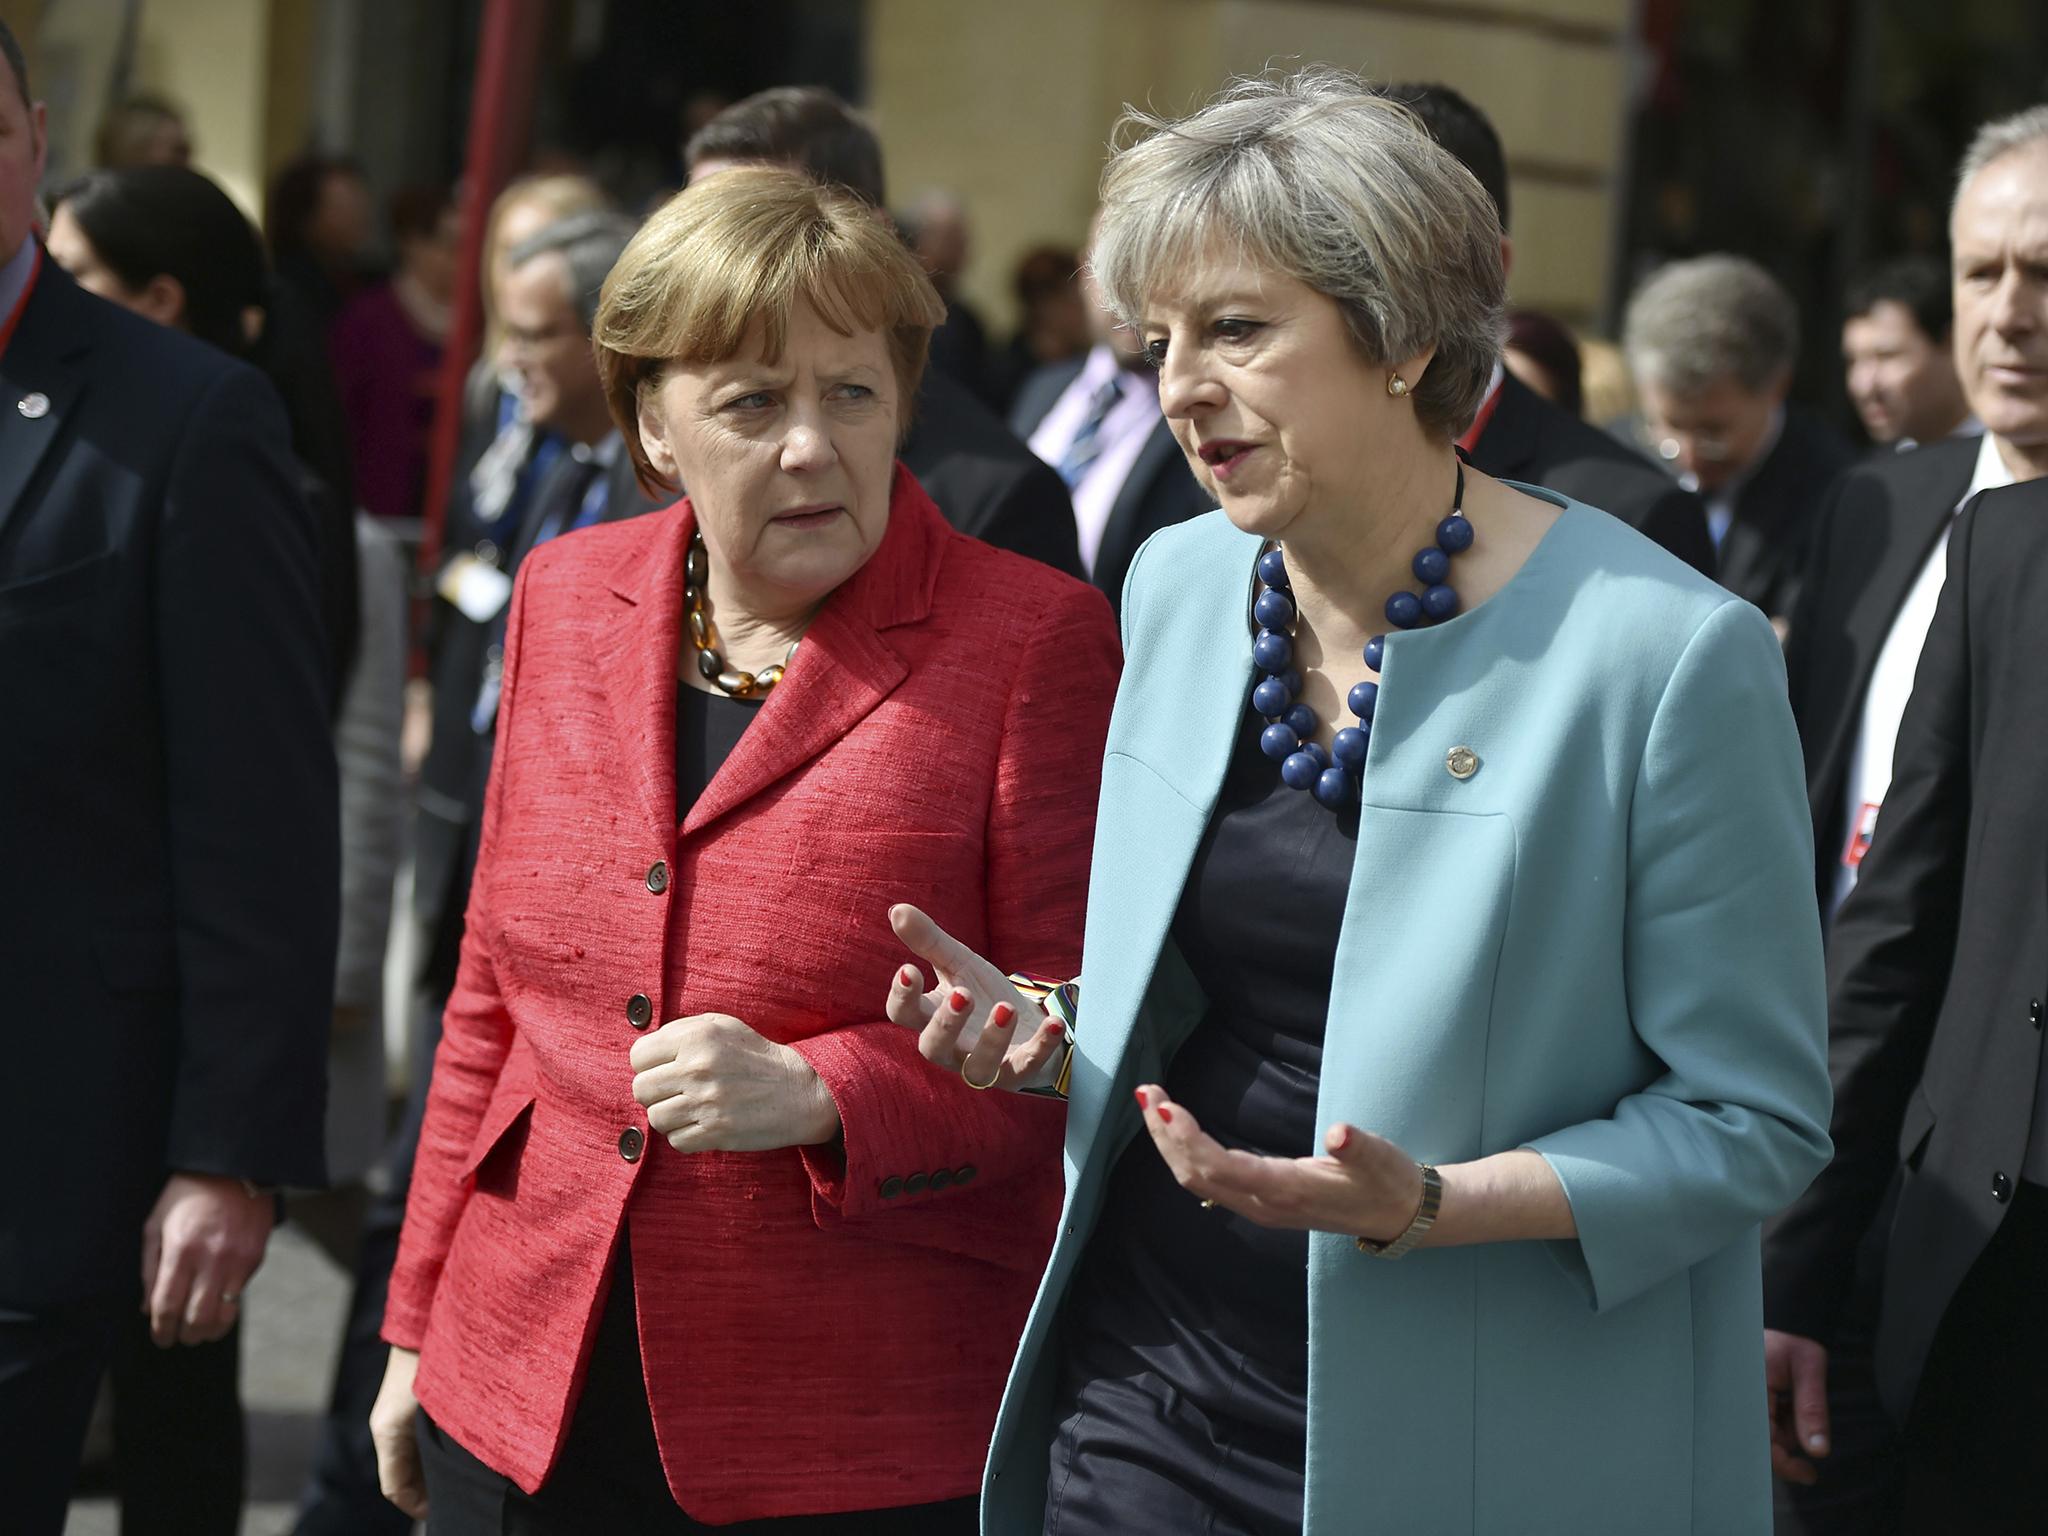 Why hasn’t Theresa May tried harder to hold out the hand of friendship to the people of the EU?